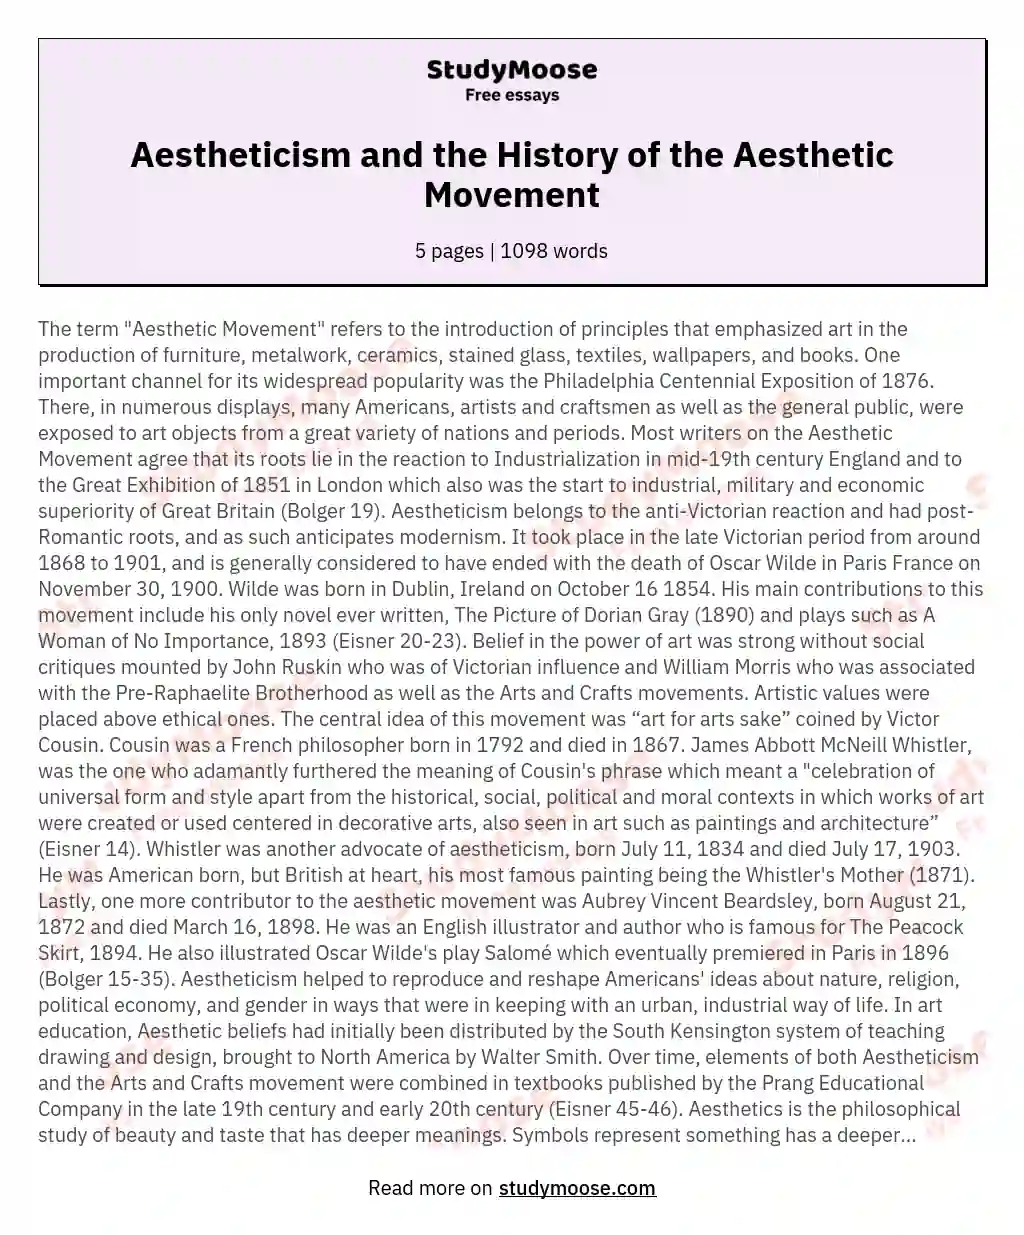 Aestheticism and the History of the Aesthetic Movement